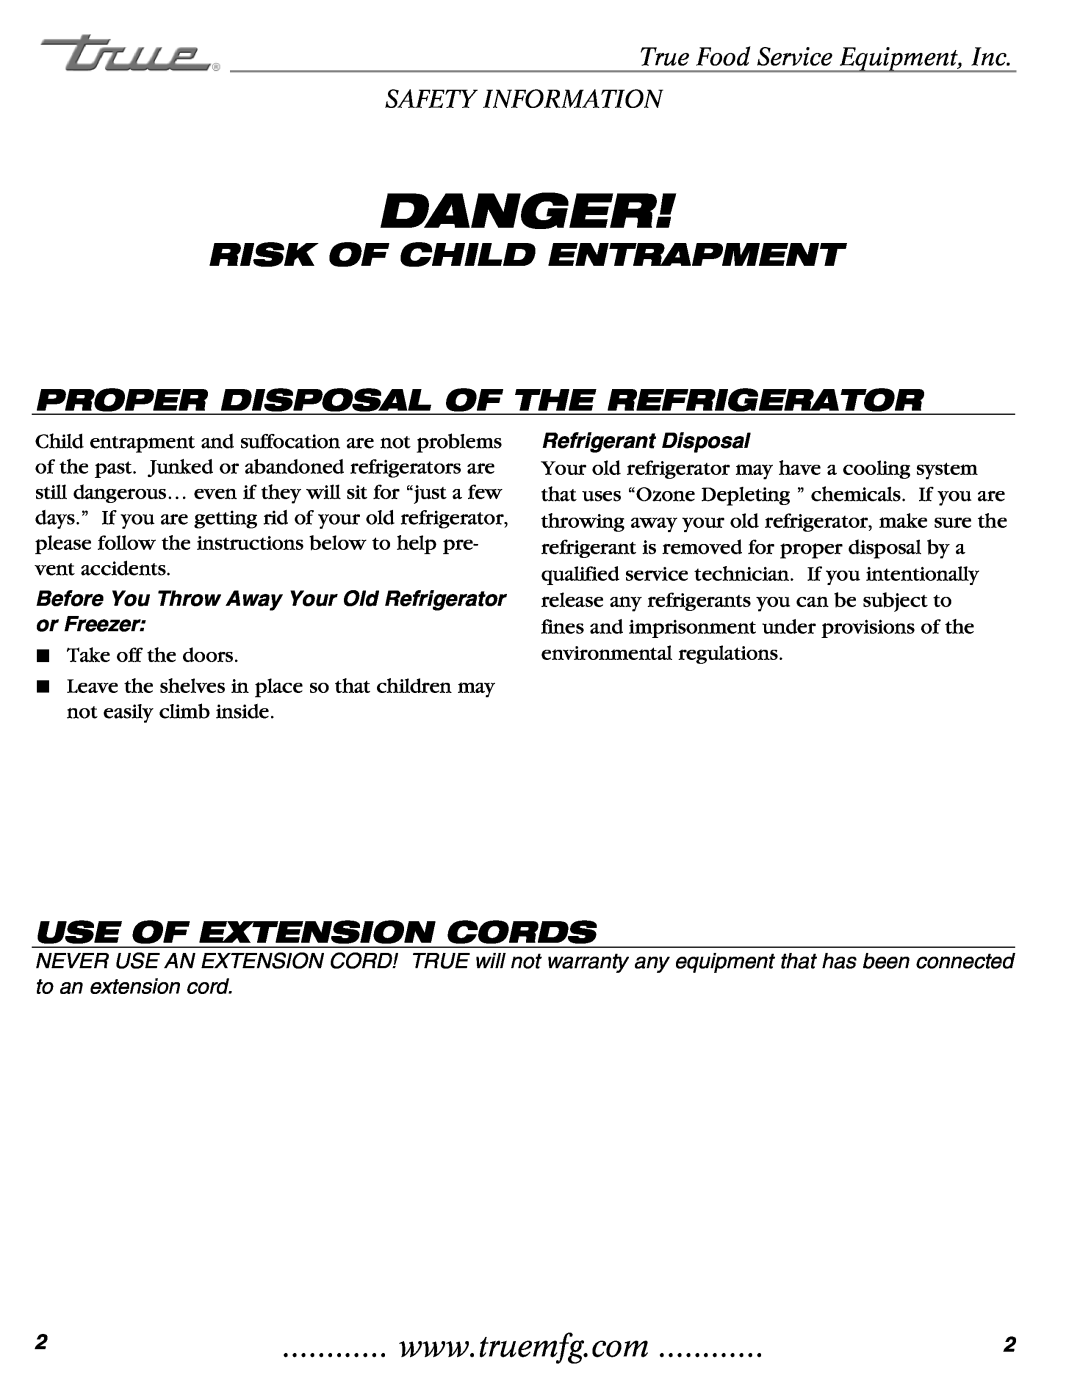 True Manufacturing Company TR1RRI-1S Risk Of Child Entrapment, Proper Disposal Of The Refrigerator, Use Of Extension Cords 